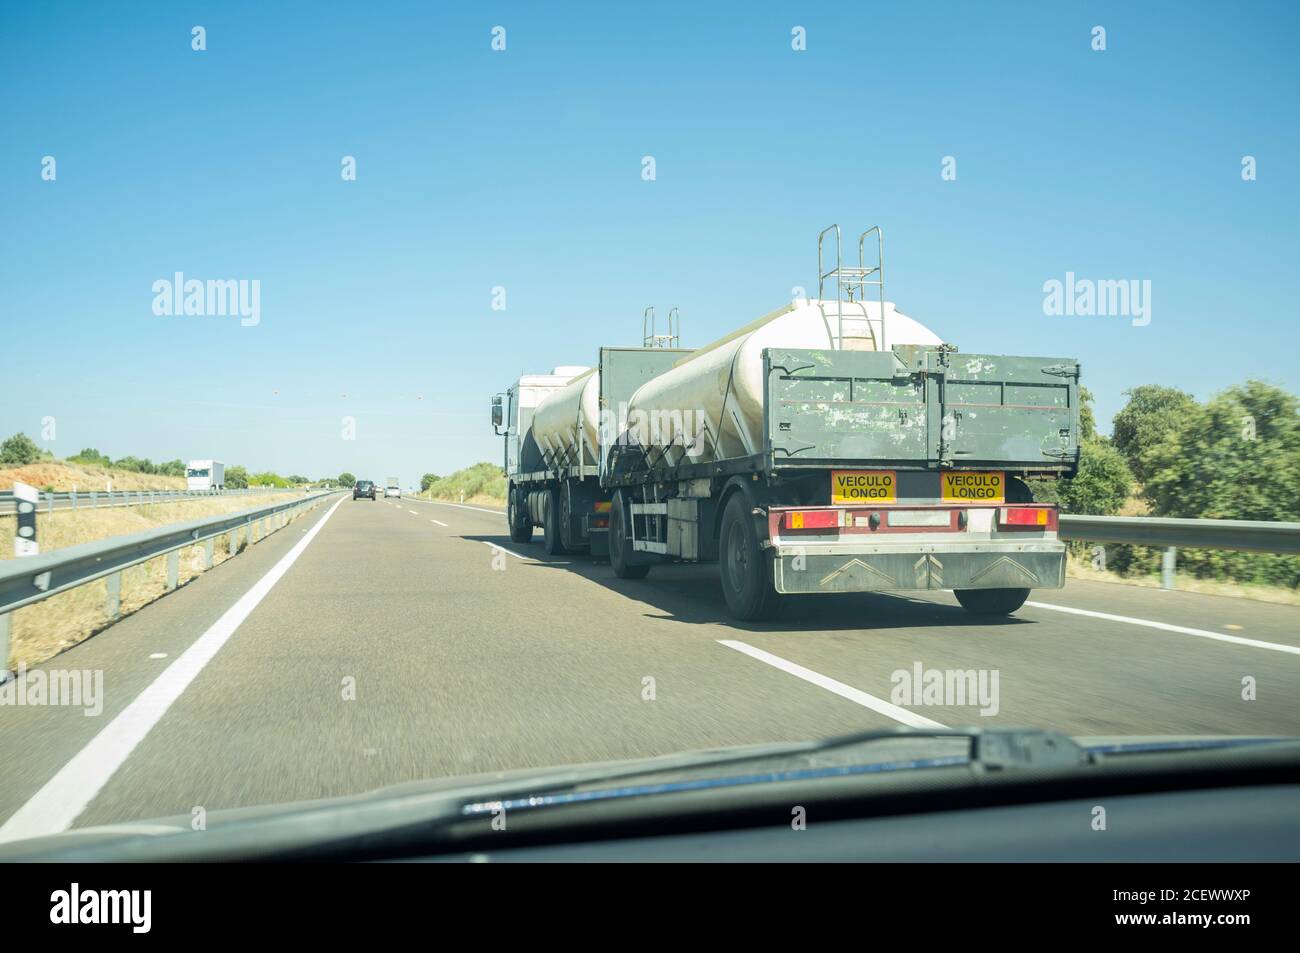 Driving behind B-double trailer loading tanks on divided highway road. View from the inside of the car Stock Photo